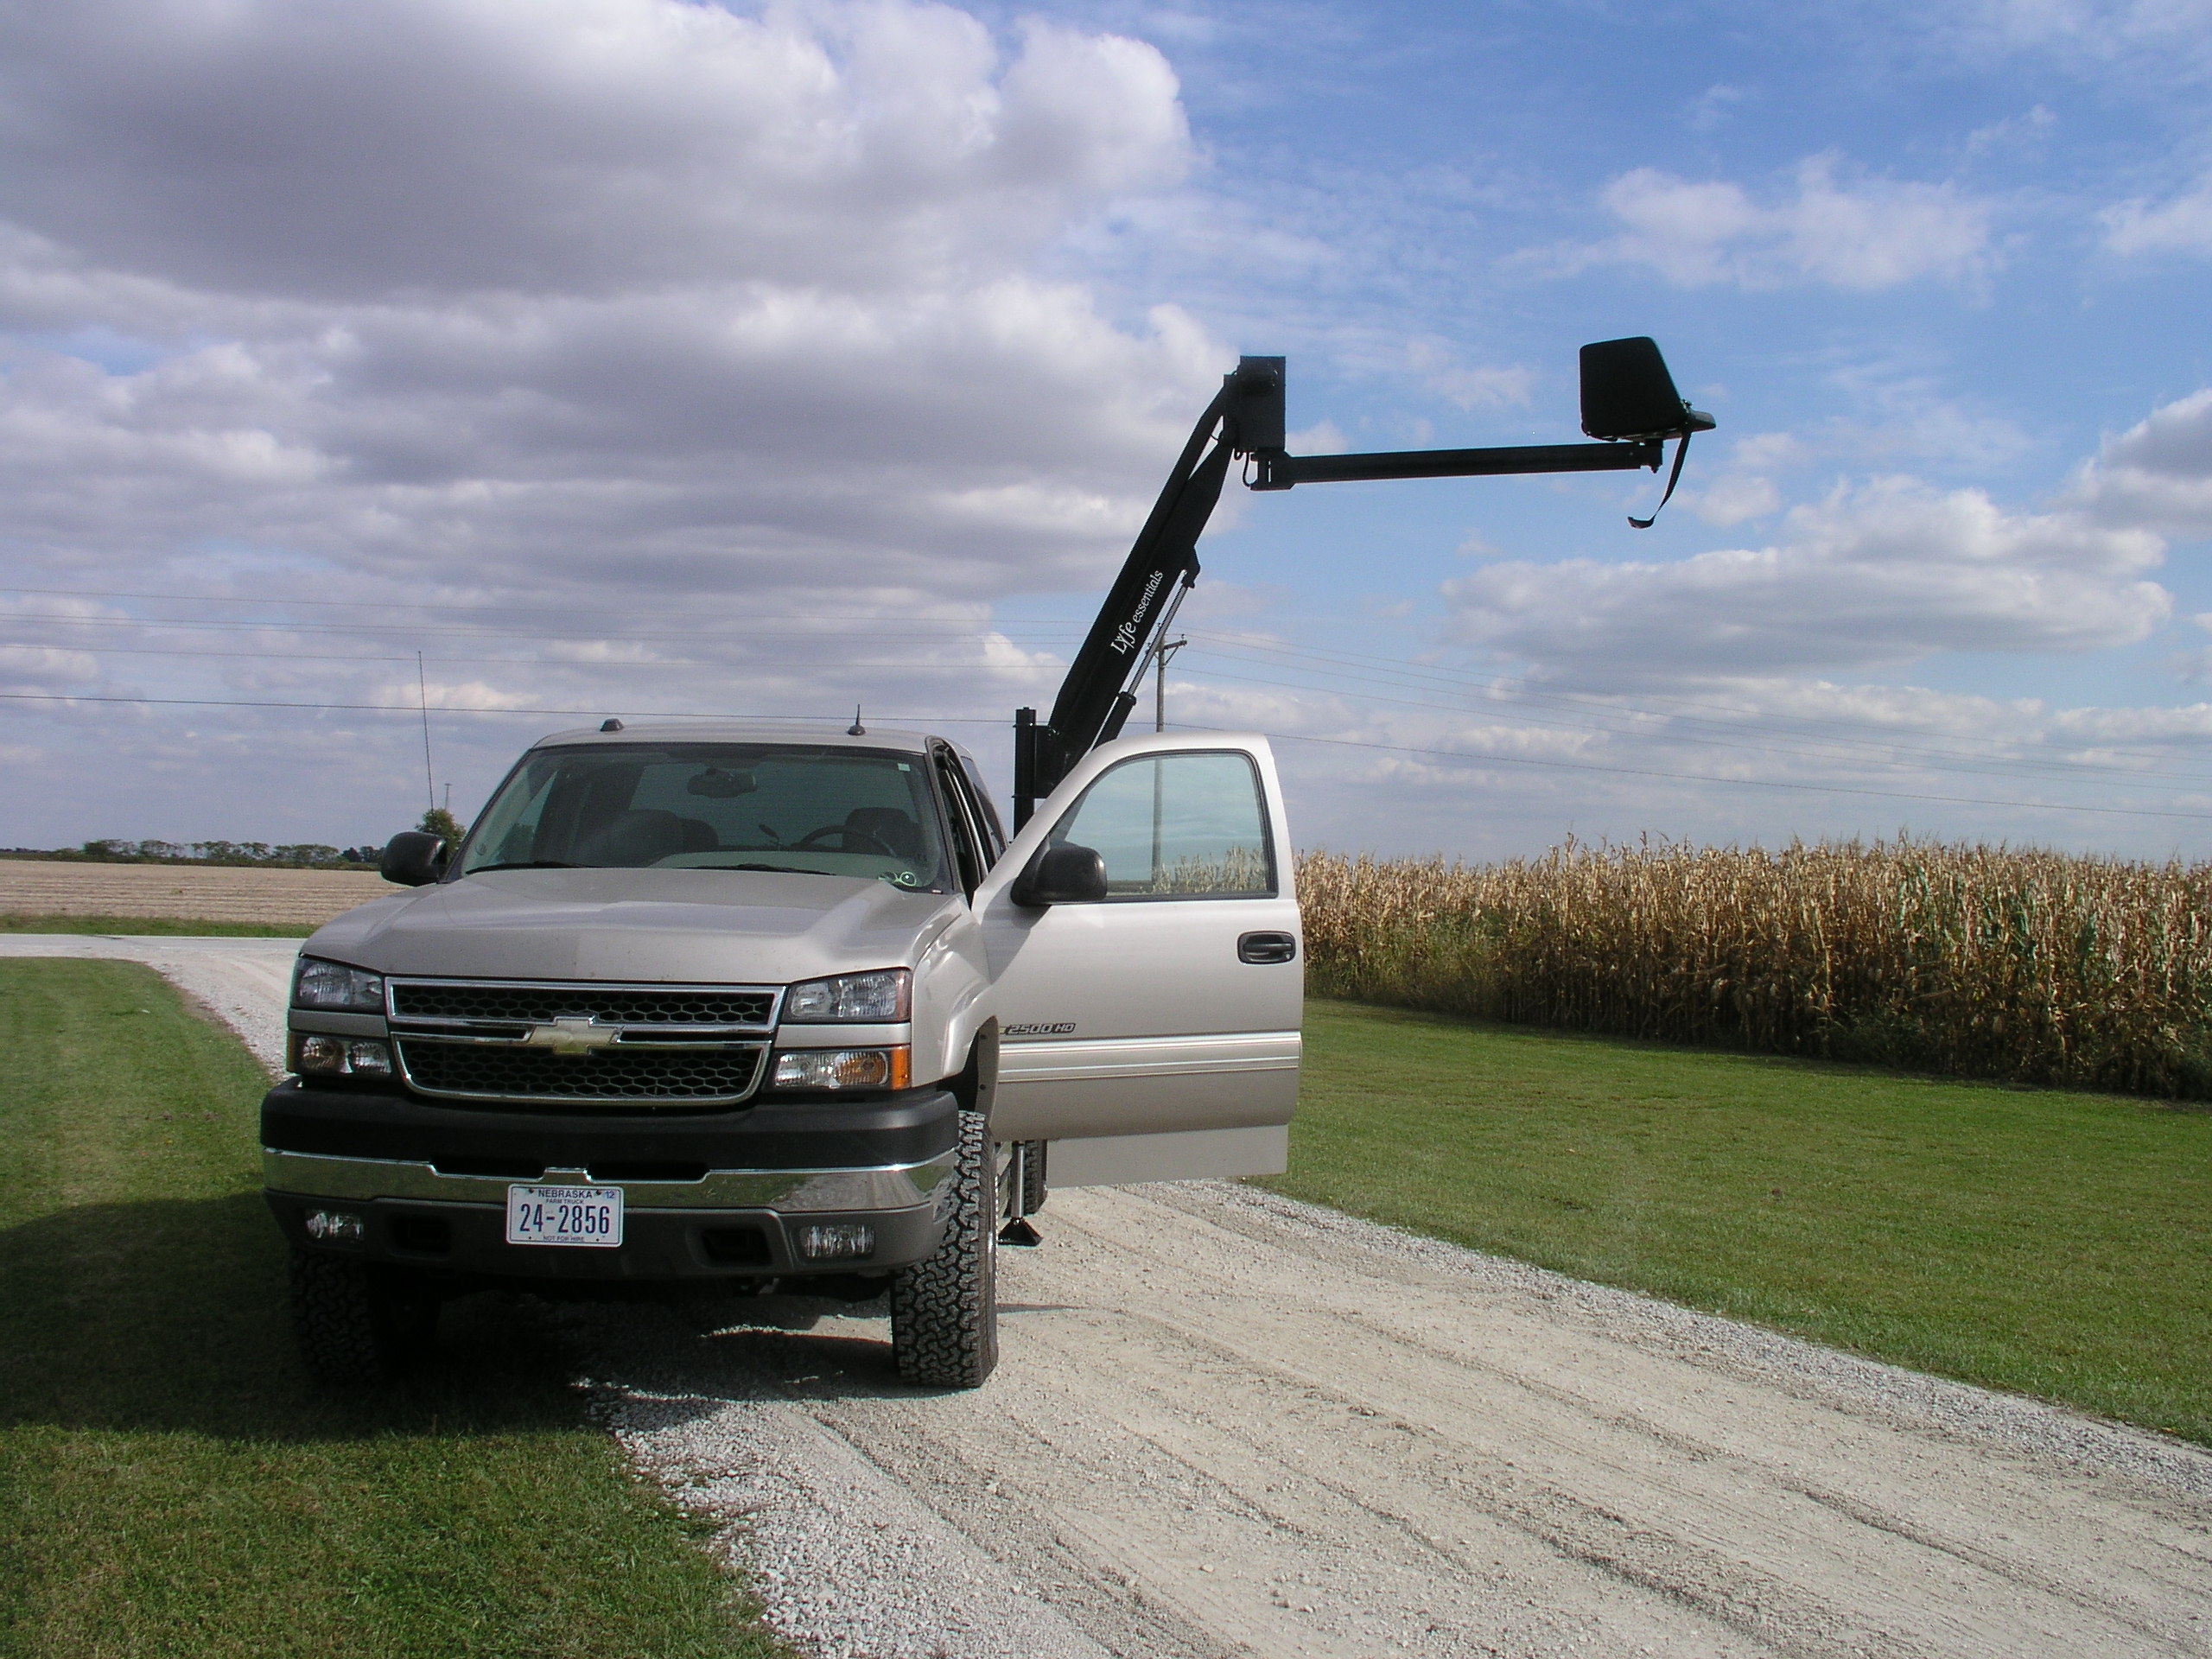 Manlift mounted on pickup truck extended 12 feet high and 14 feet to the side so a worker who cannot climb can access large equipment and tall places.